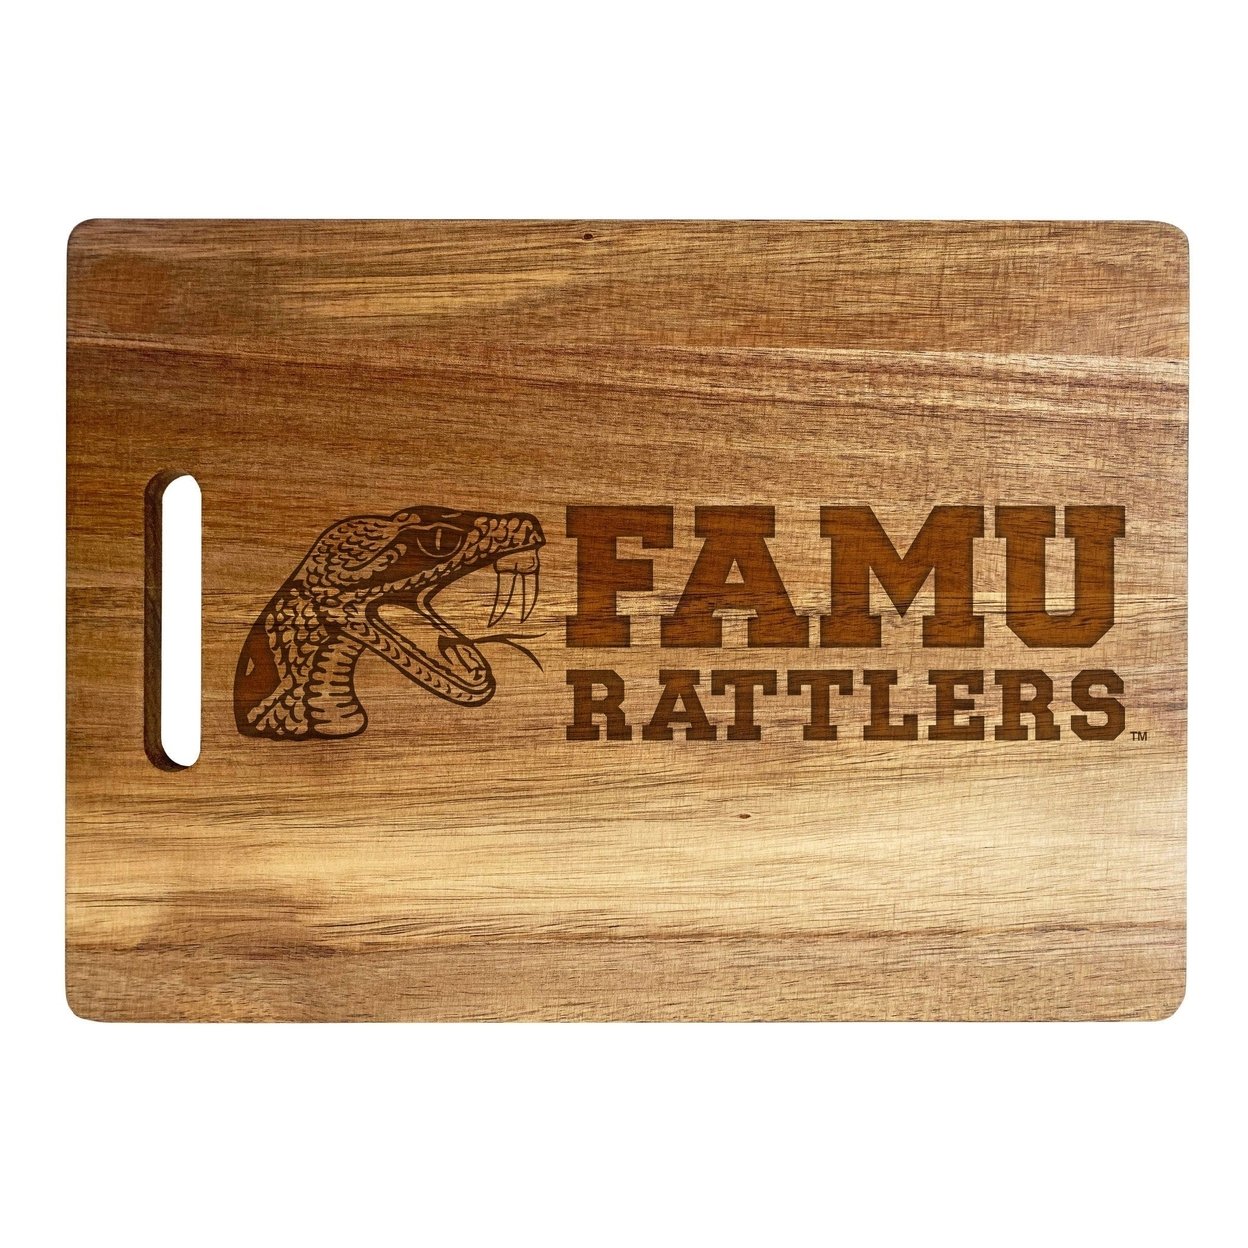 Florida A&M Rattlers Engraved Wooden Cutting Board 10 X 14 Acacia Wood - Large Engraving